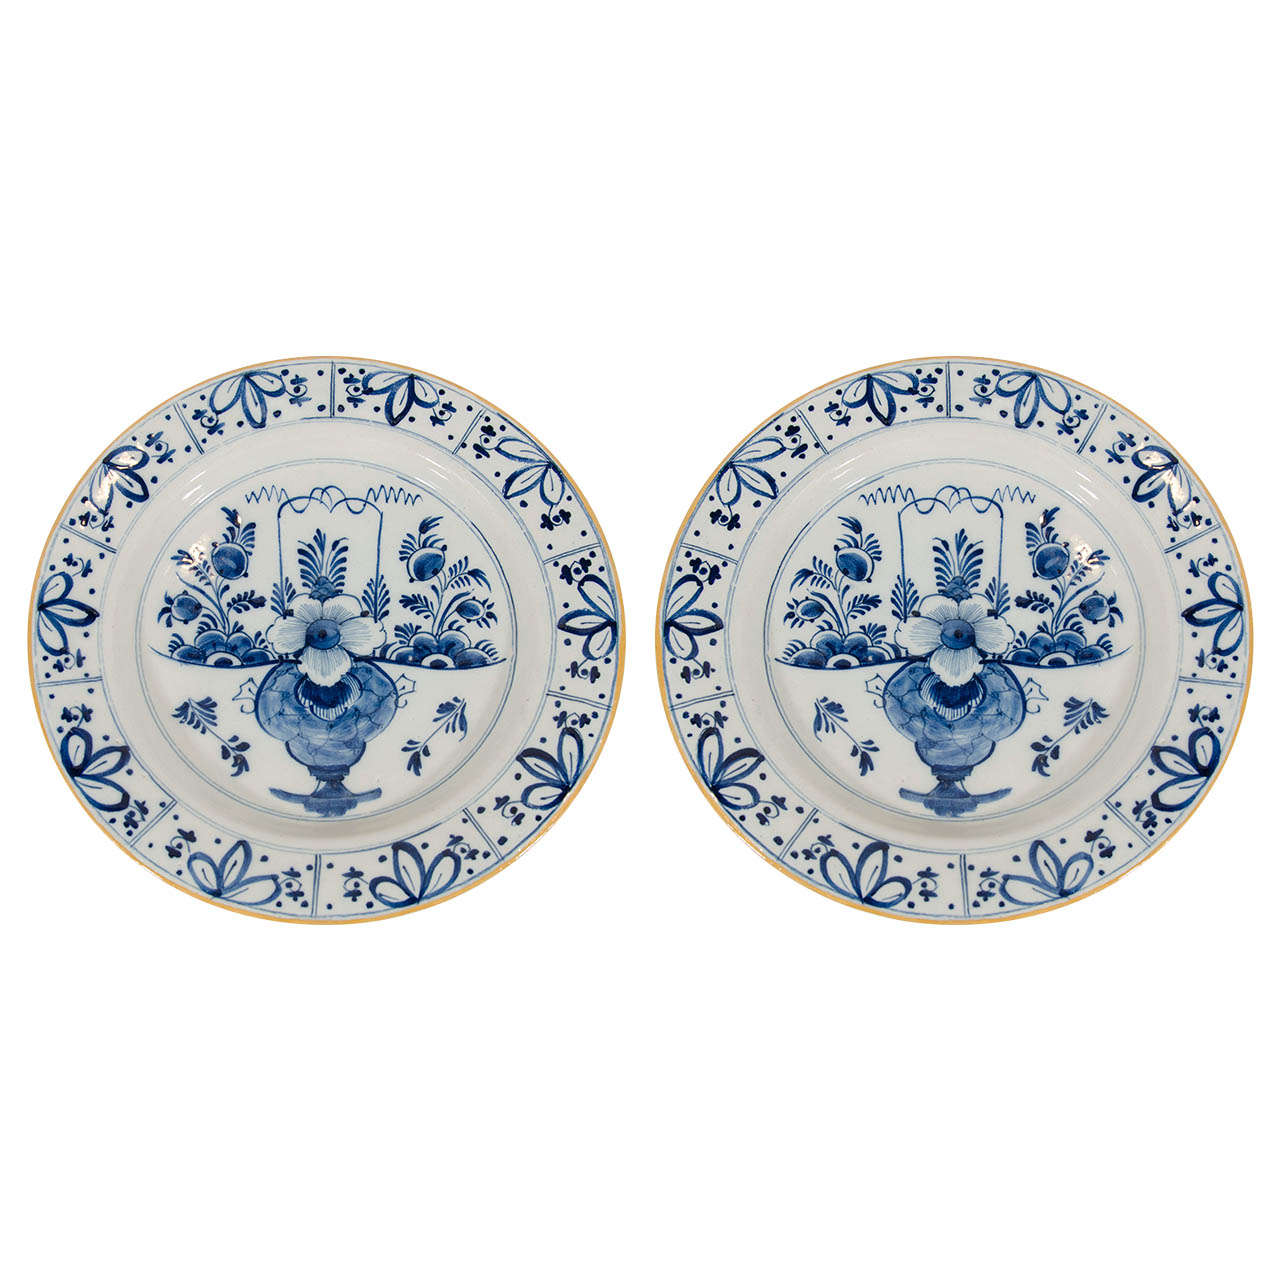 A Pair of Dutch Delft Blue and White Chargers